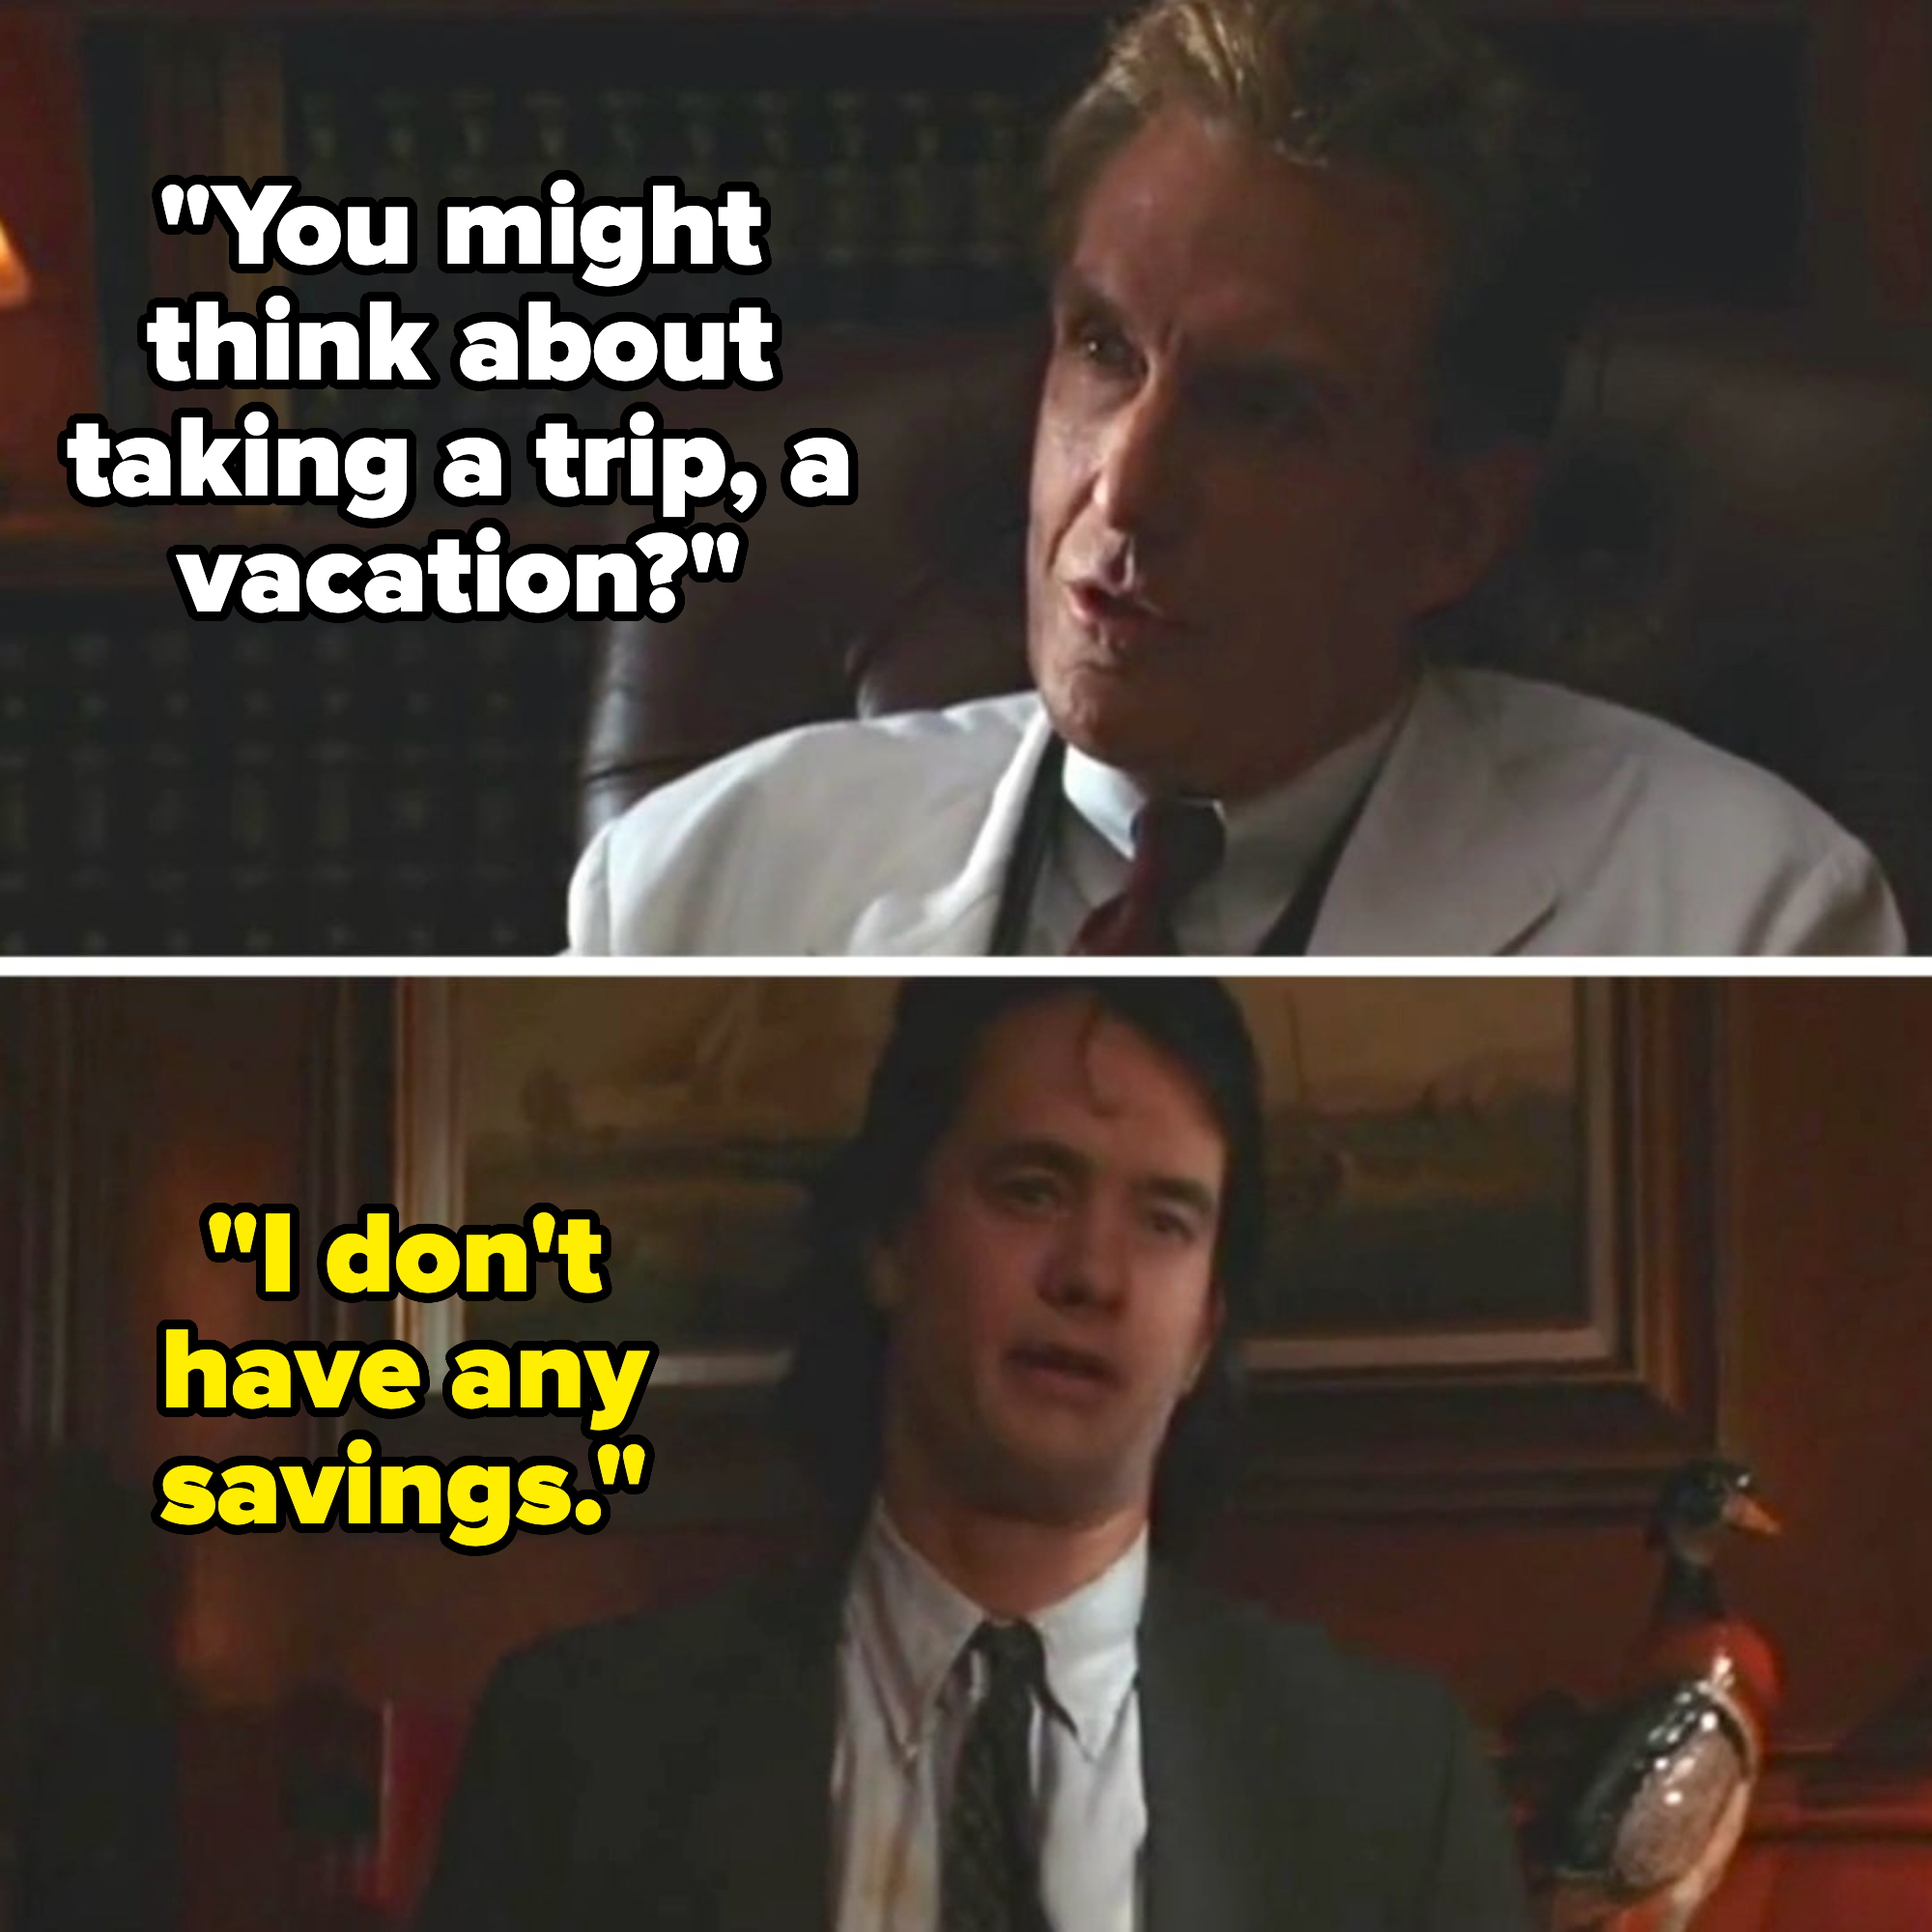 doctor tells man to go on vacation but he says he has no savings